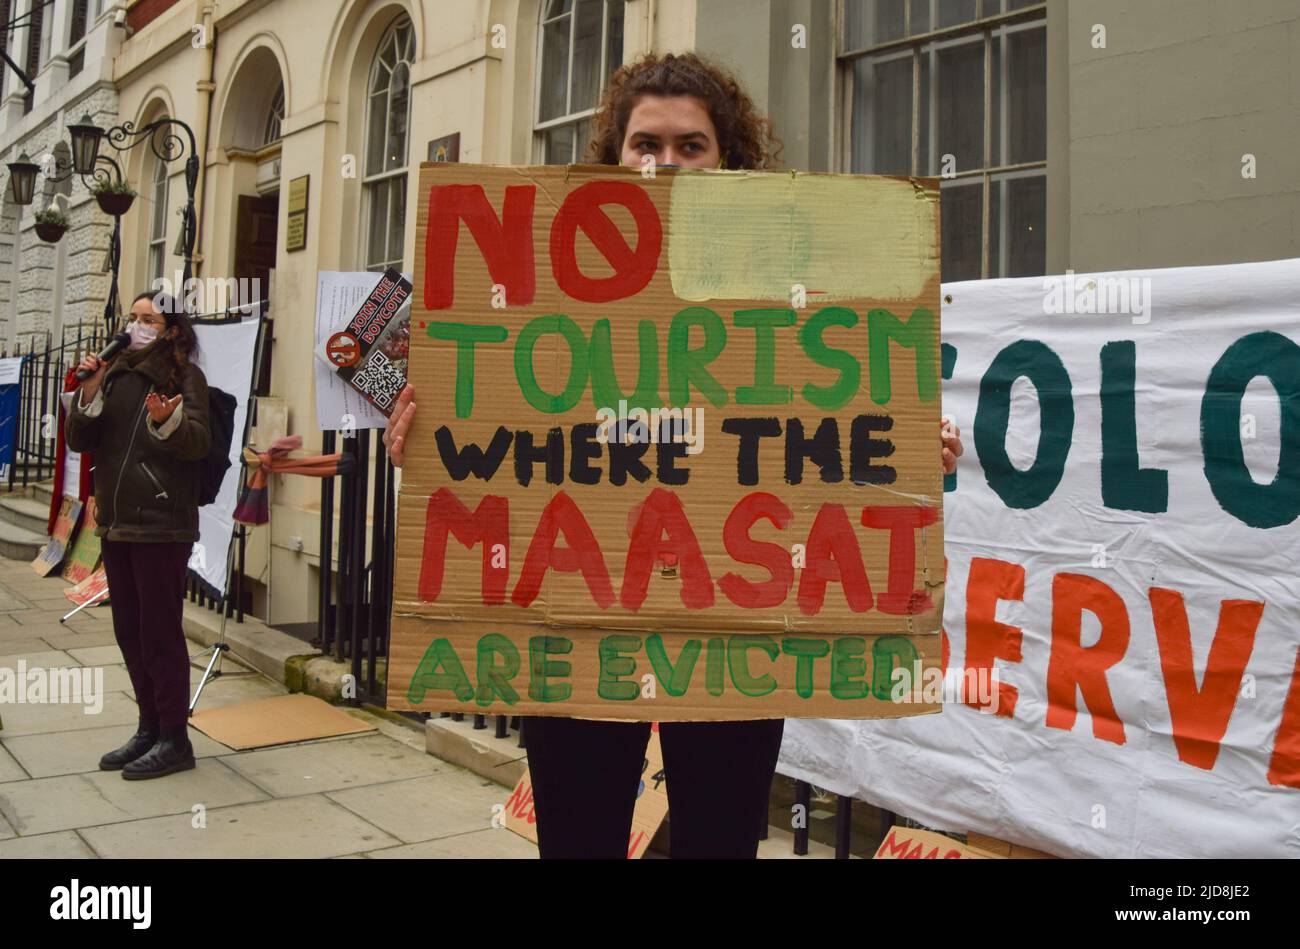 London, UK. 28th February 2022. Activists gathered outside the Tanzania High Commission in London in protest against the planned eviction of 167000 Maasai people from Ngorongoro and Loliondo to make space for trophy hunting and elite tourism. Stock Photo